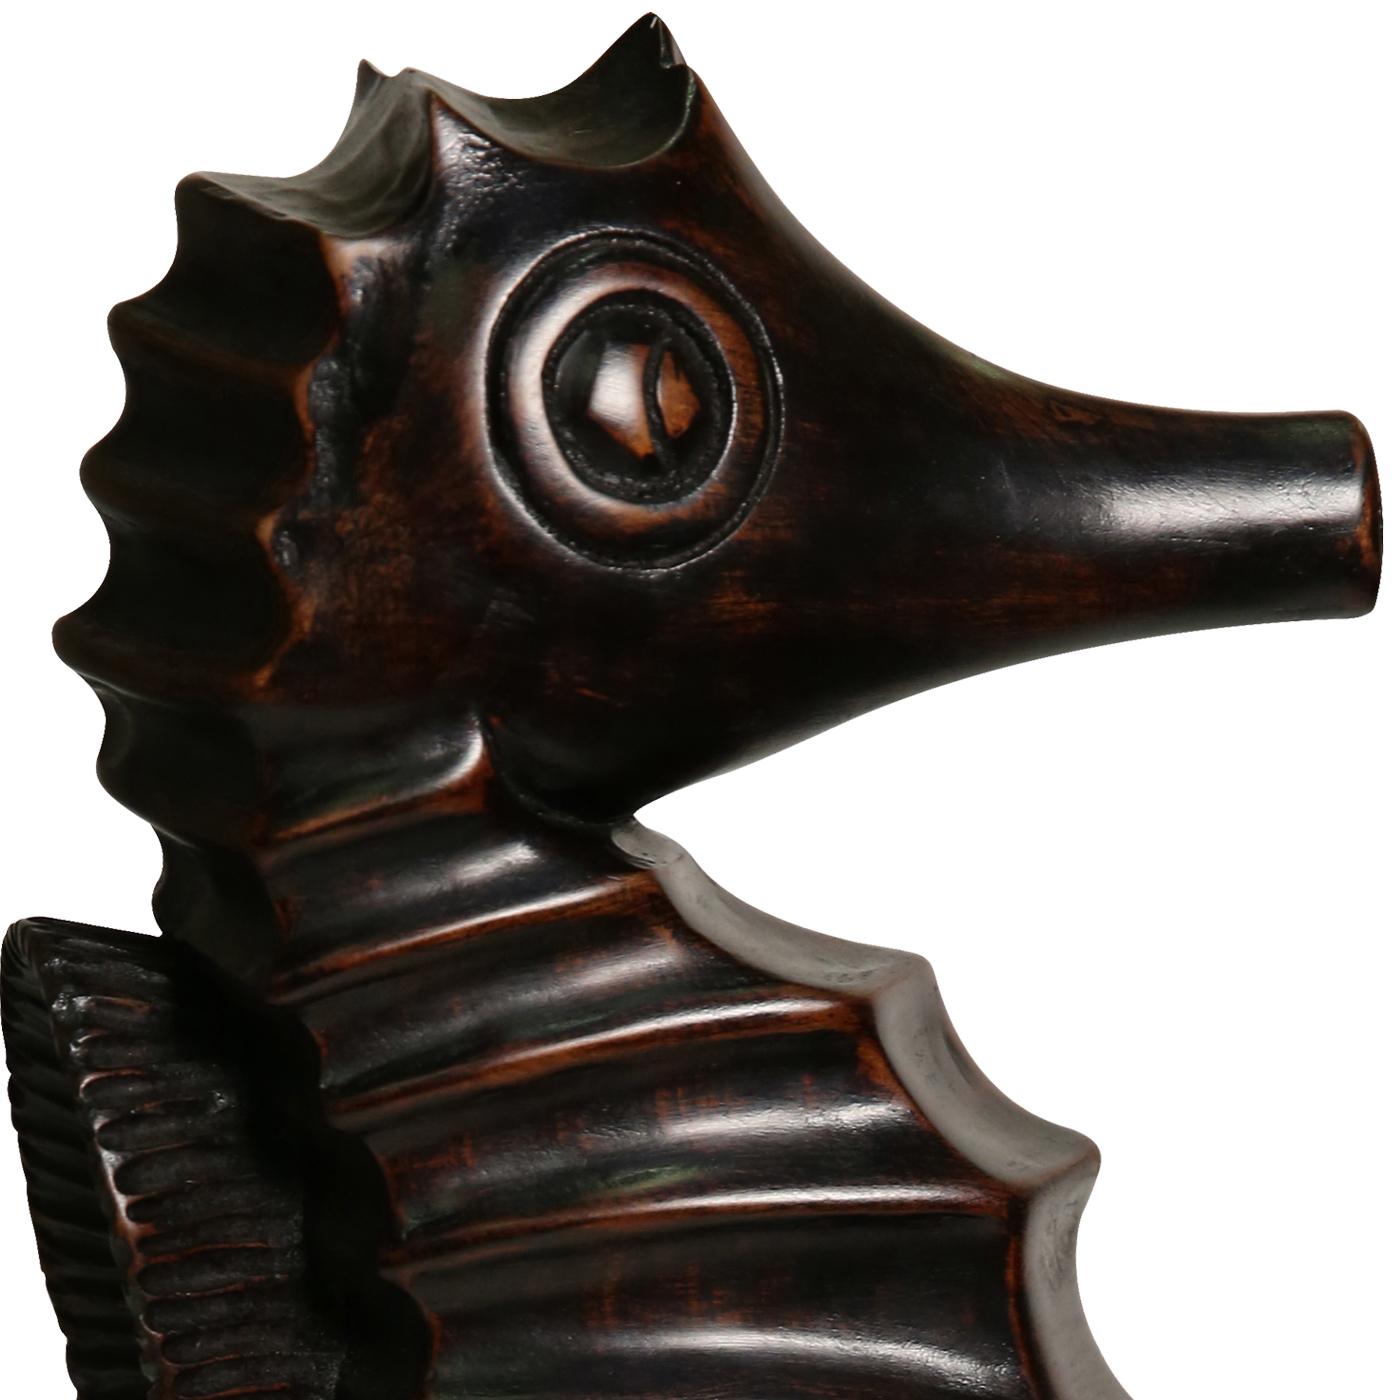 This is a stylistic decorative seahorse by Florentine carver Castorina. The decorative sculpture is entirely hand-carved and finished with a black ebony shellac.